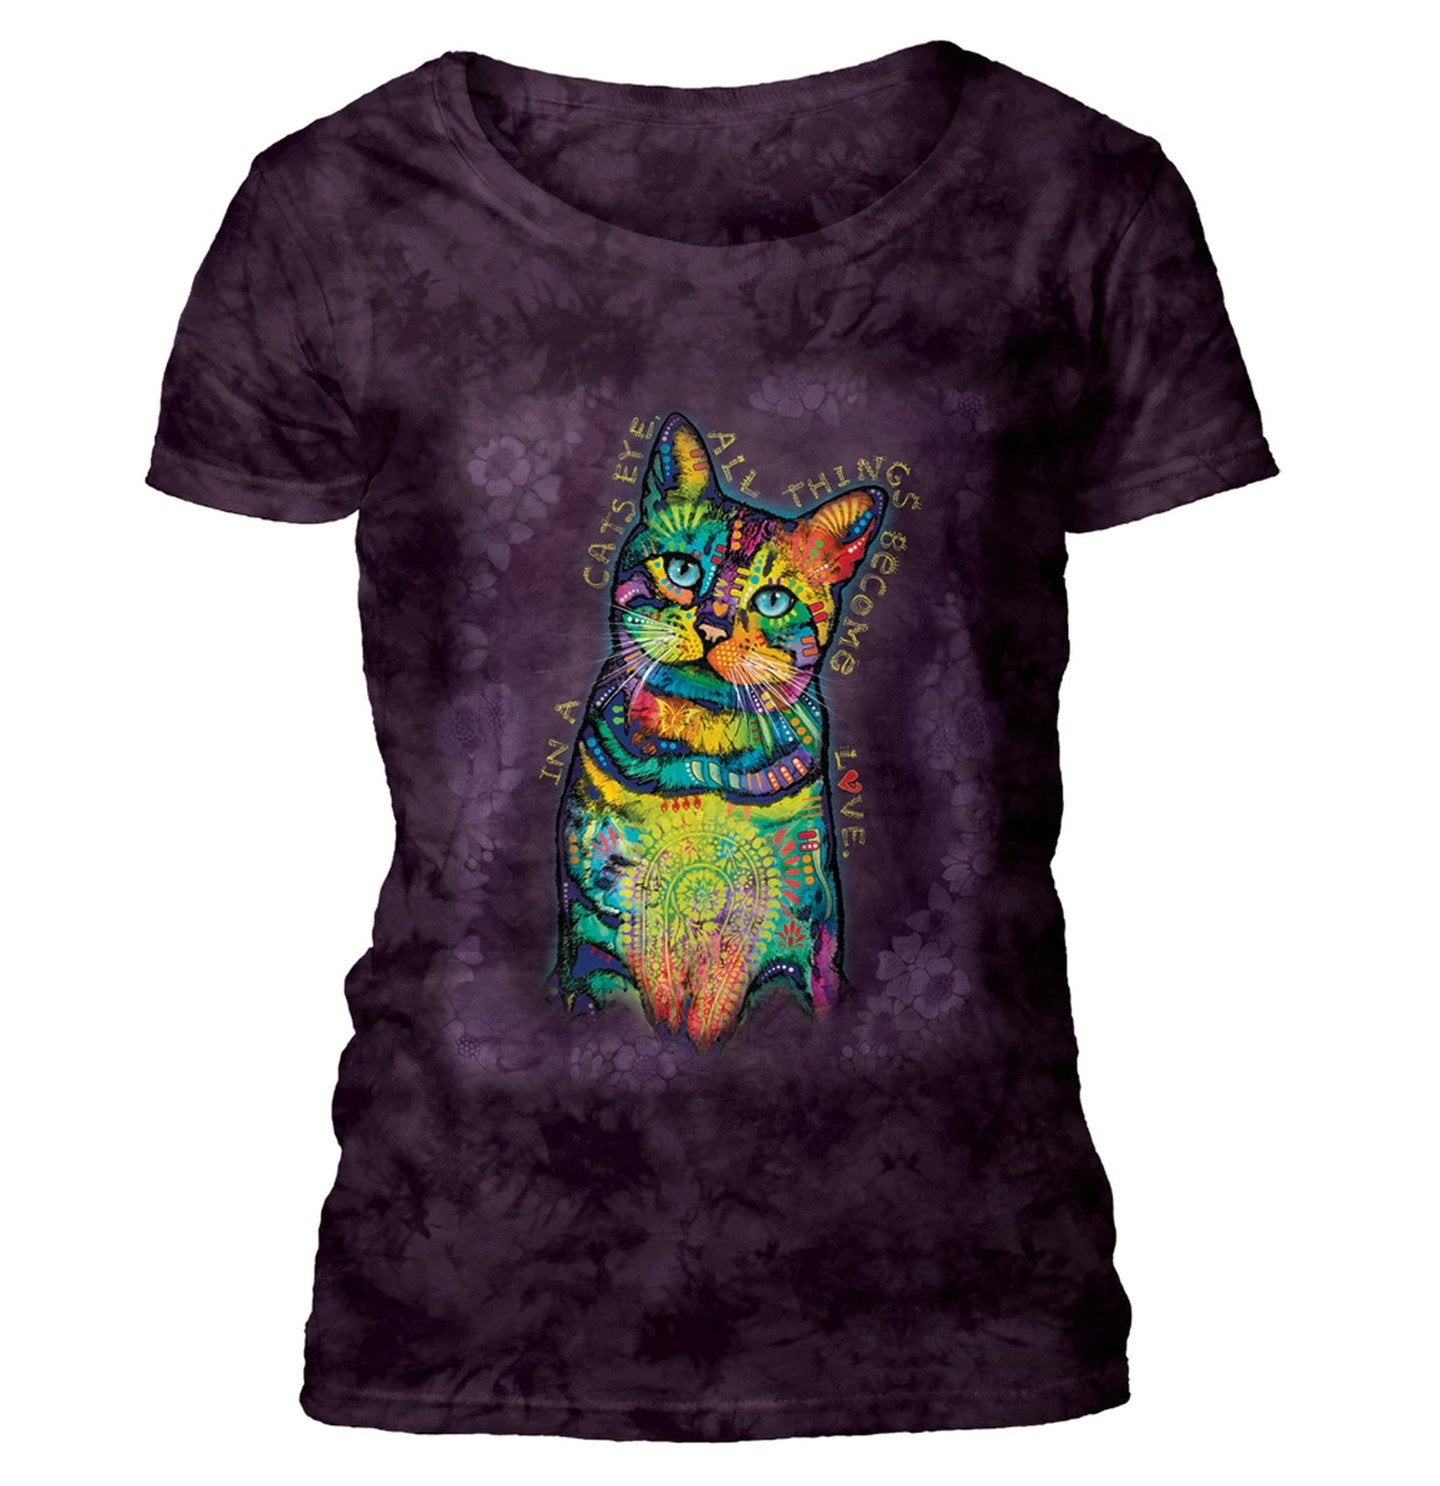 Cats Eyes - Women's Scoop Neck T-Shirt - The Mountain Dean Russo ...